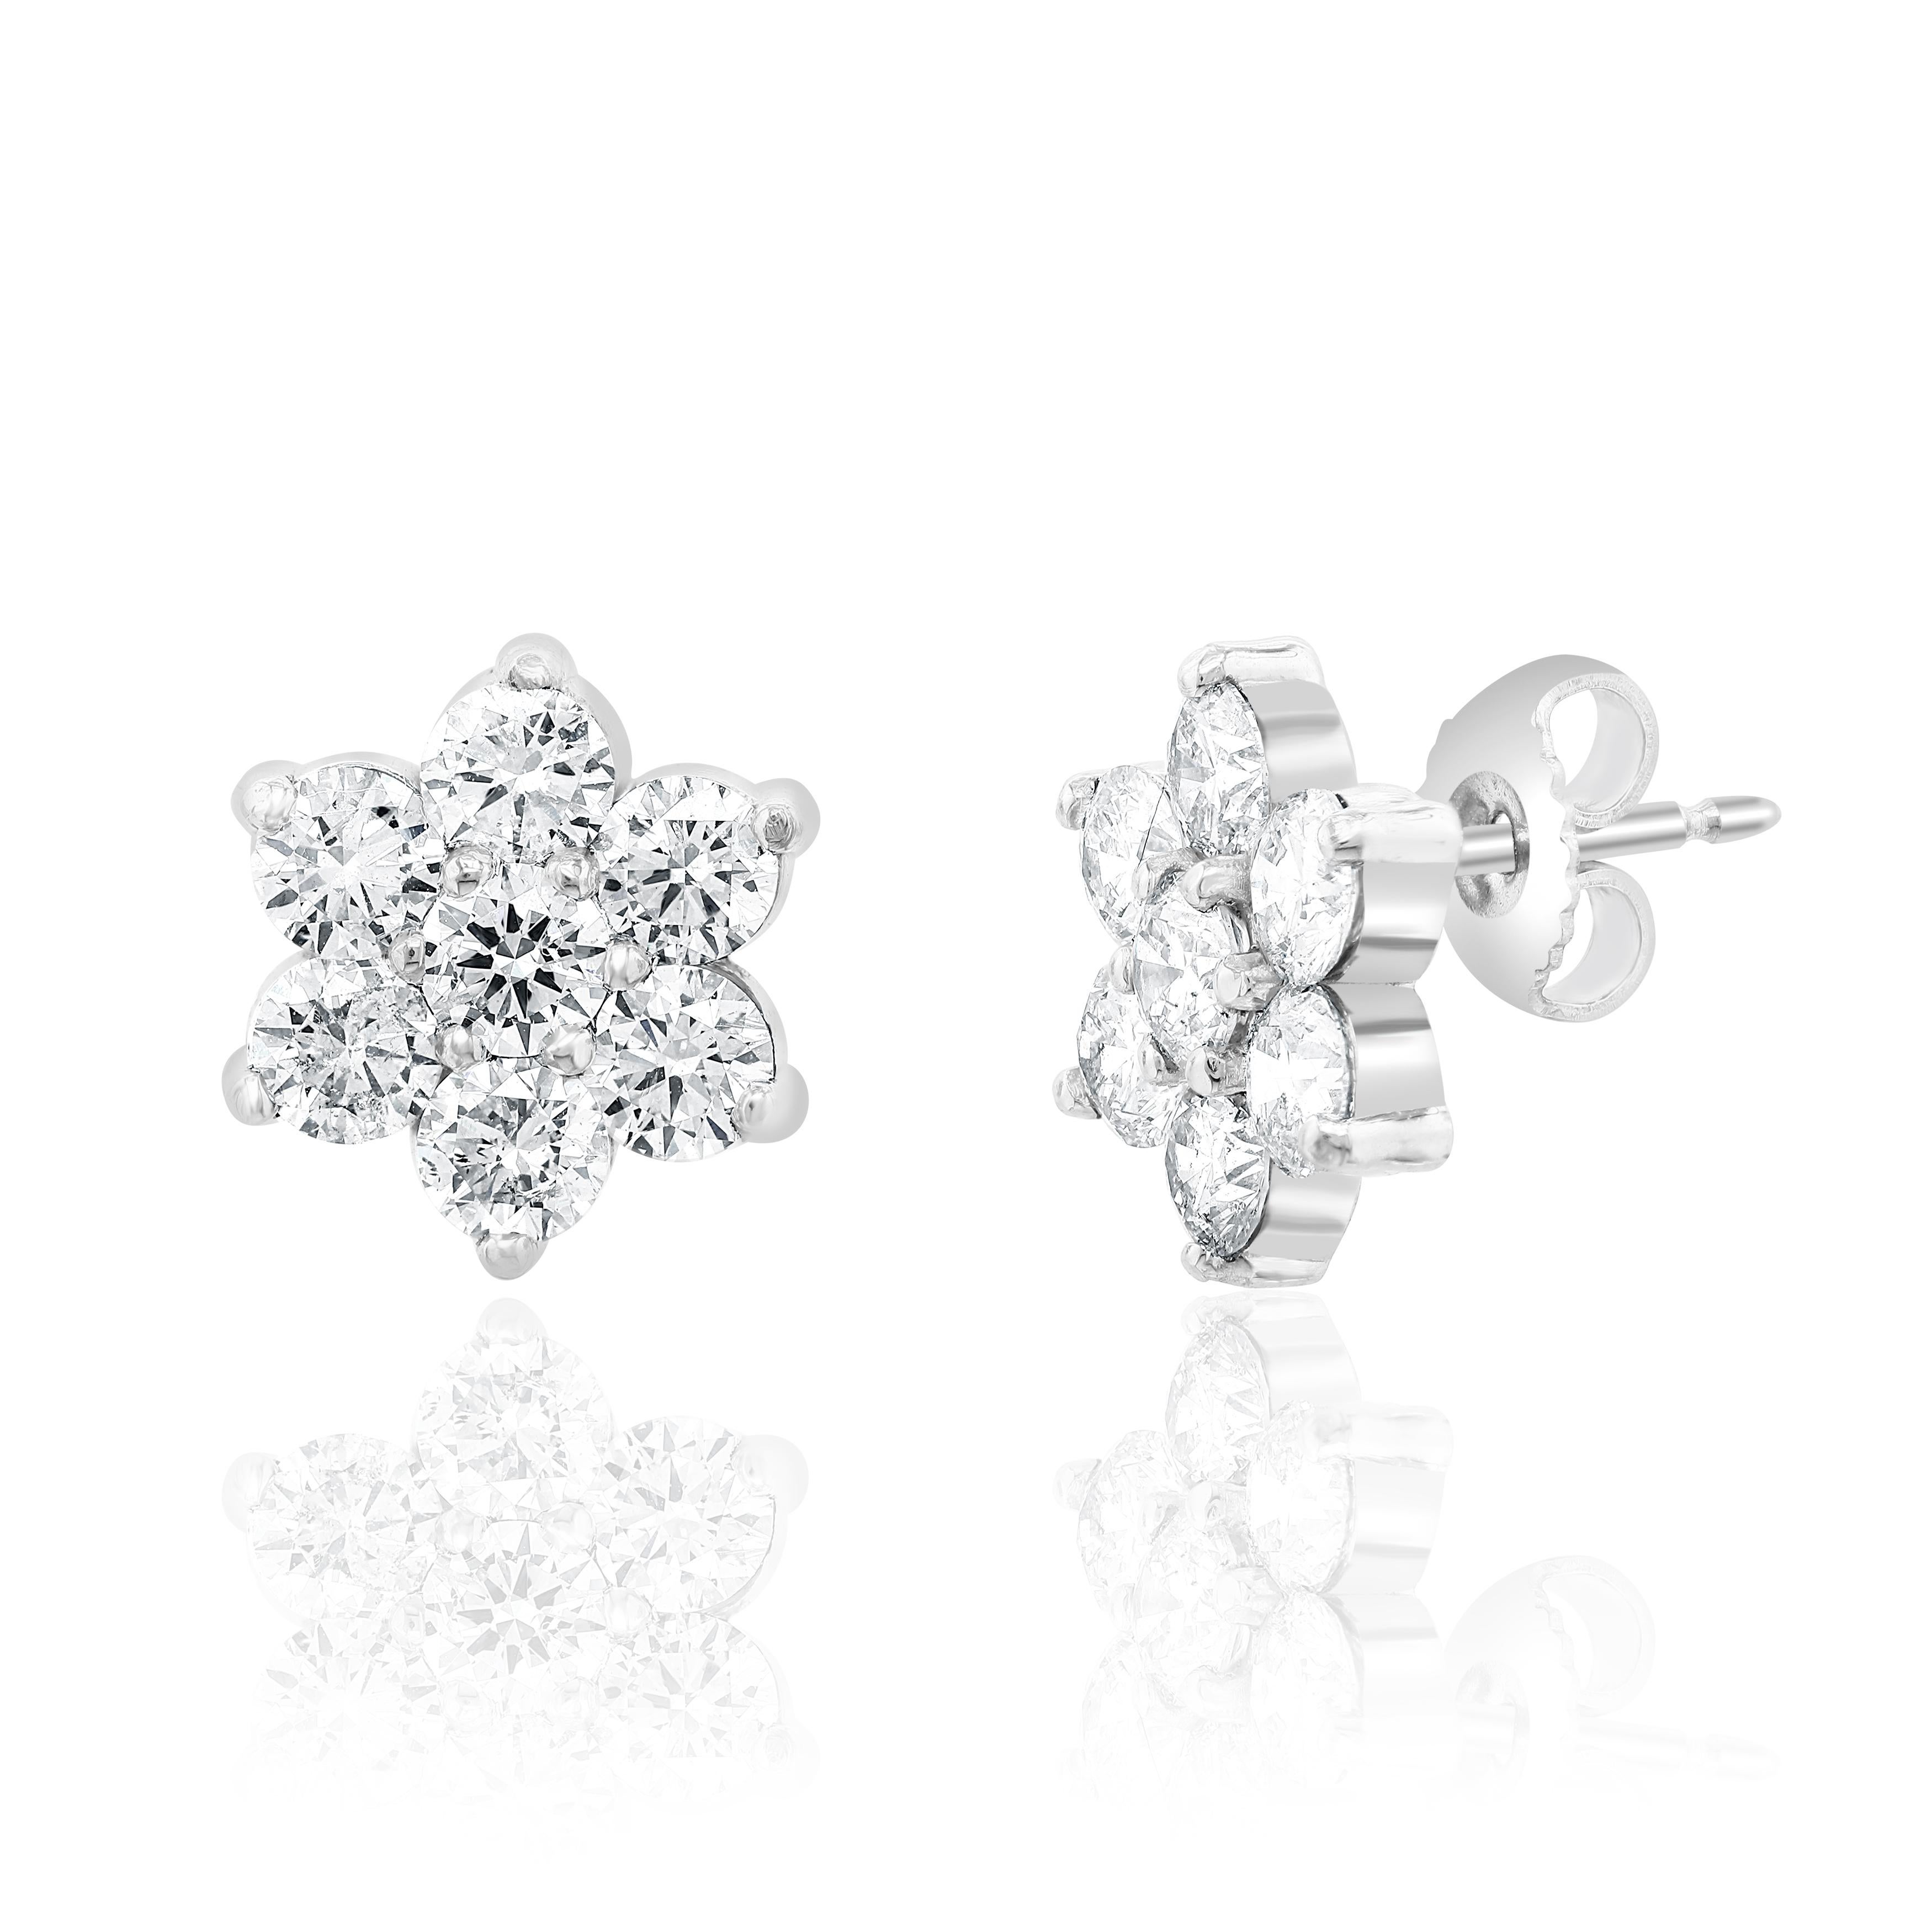 3.75 Carat Diamond Cluster Earrings.

Set in 14 Karat White Gold.
Diamonds are of H color and SI Clarity.
